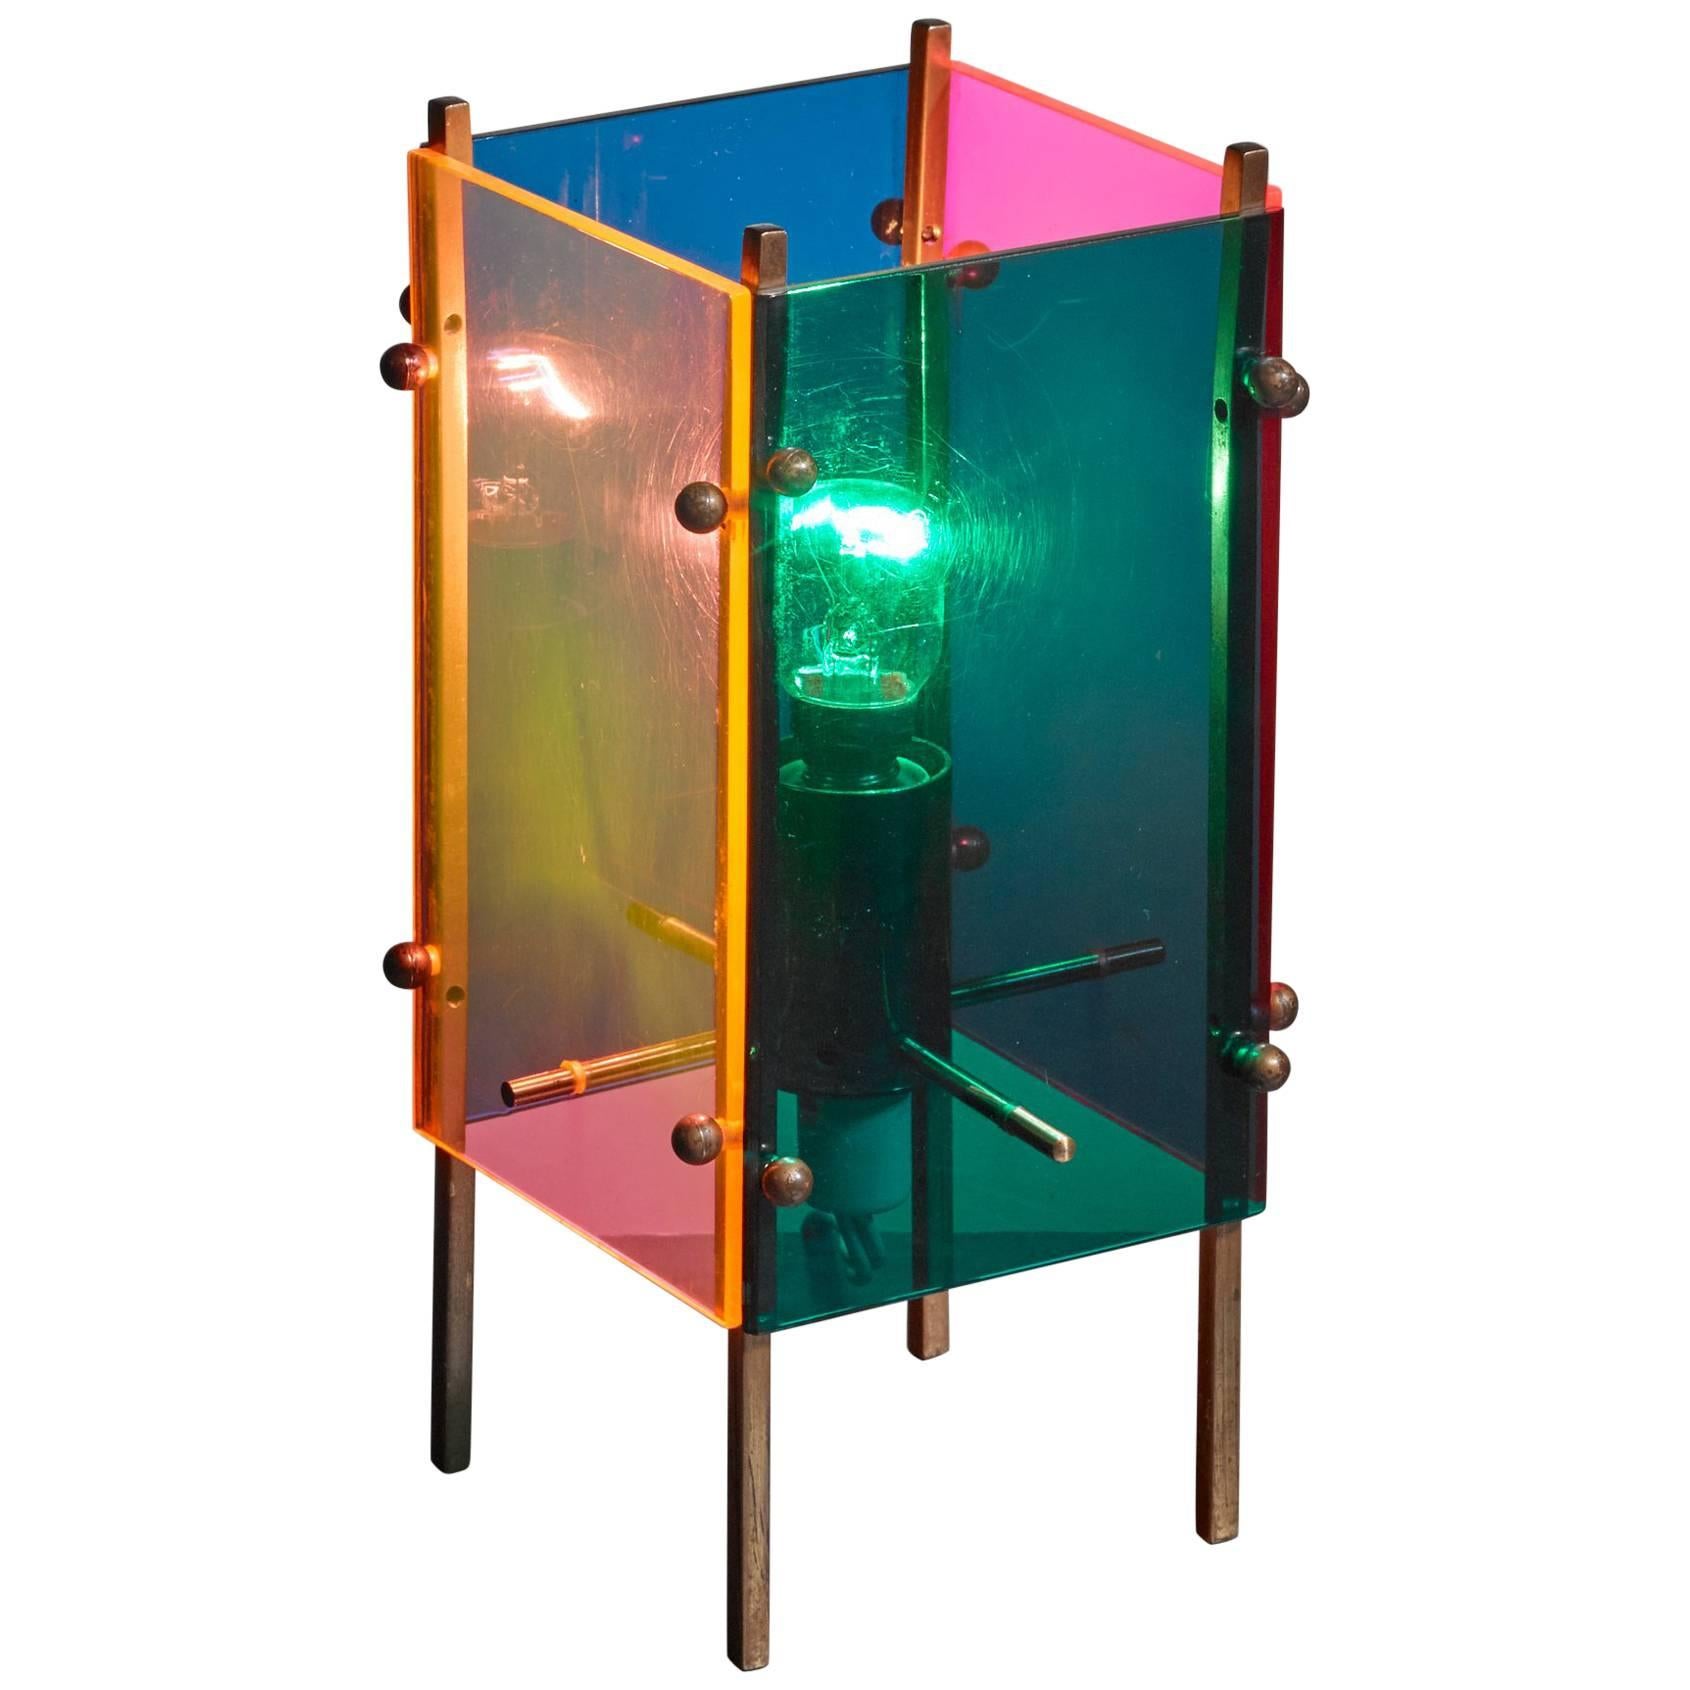 A table lamp attributed to Angelo Lelli for Arredoluce, made of blue, green, orange and yellow plexiglass panels on a brass frame.